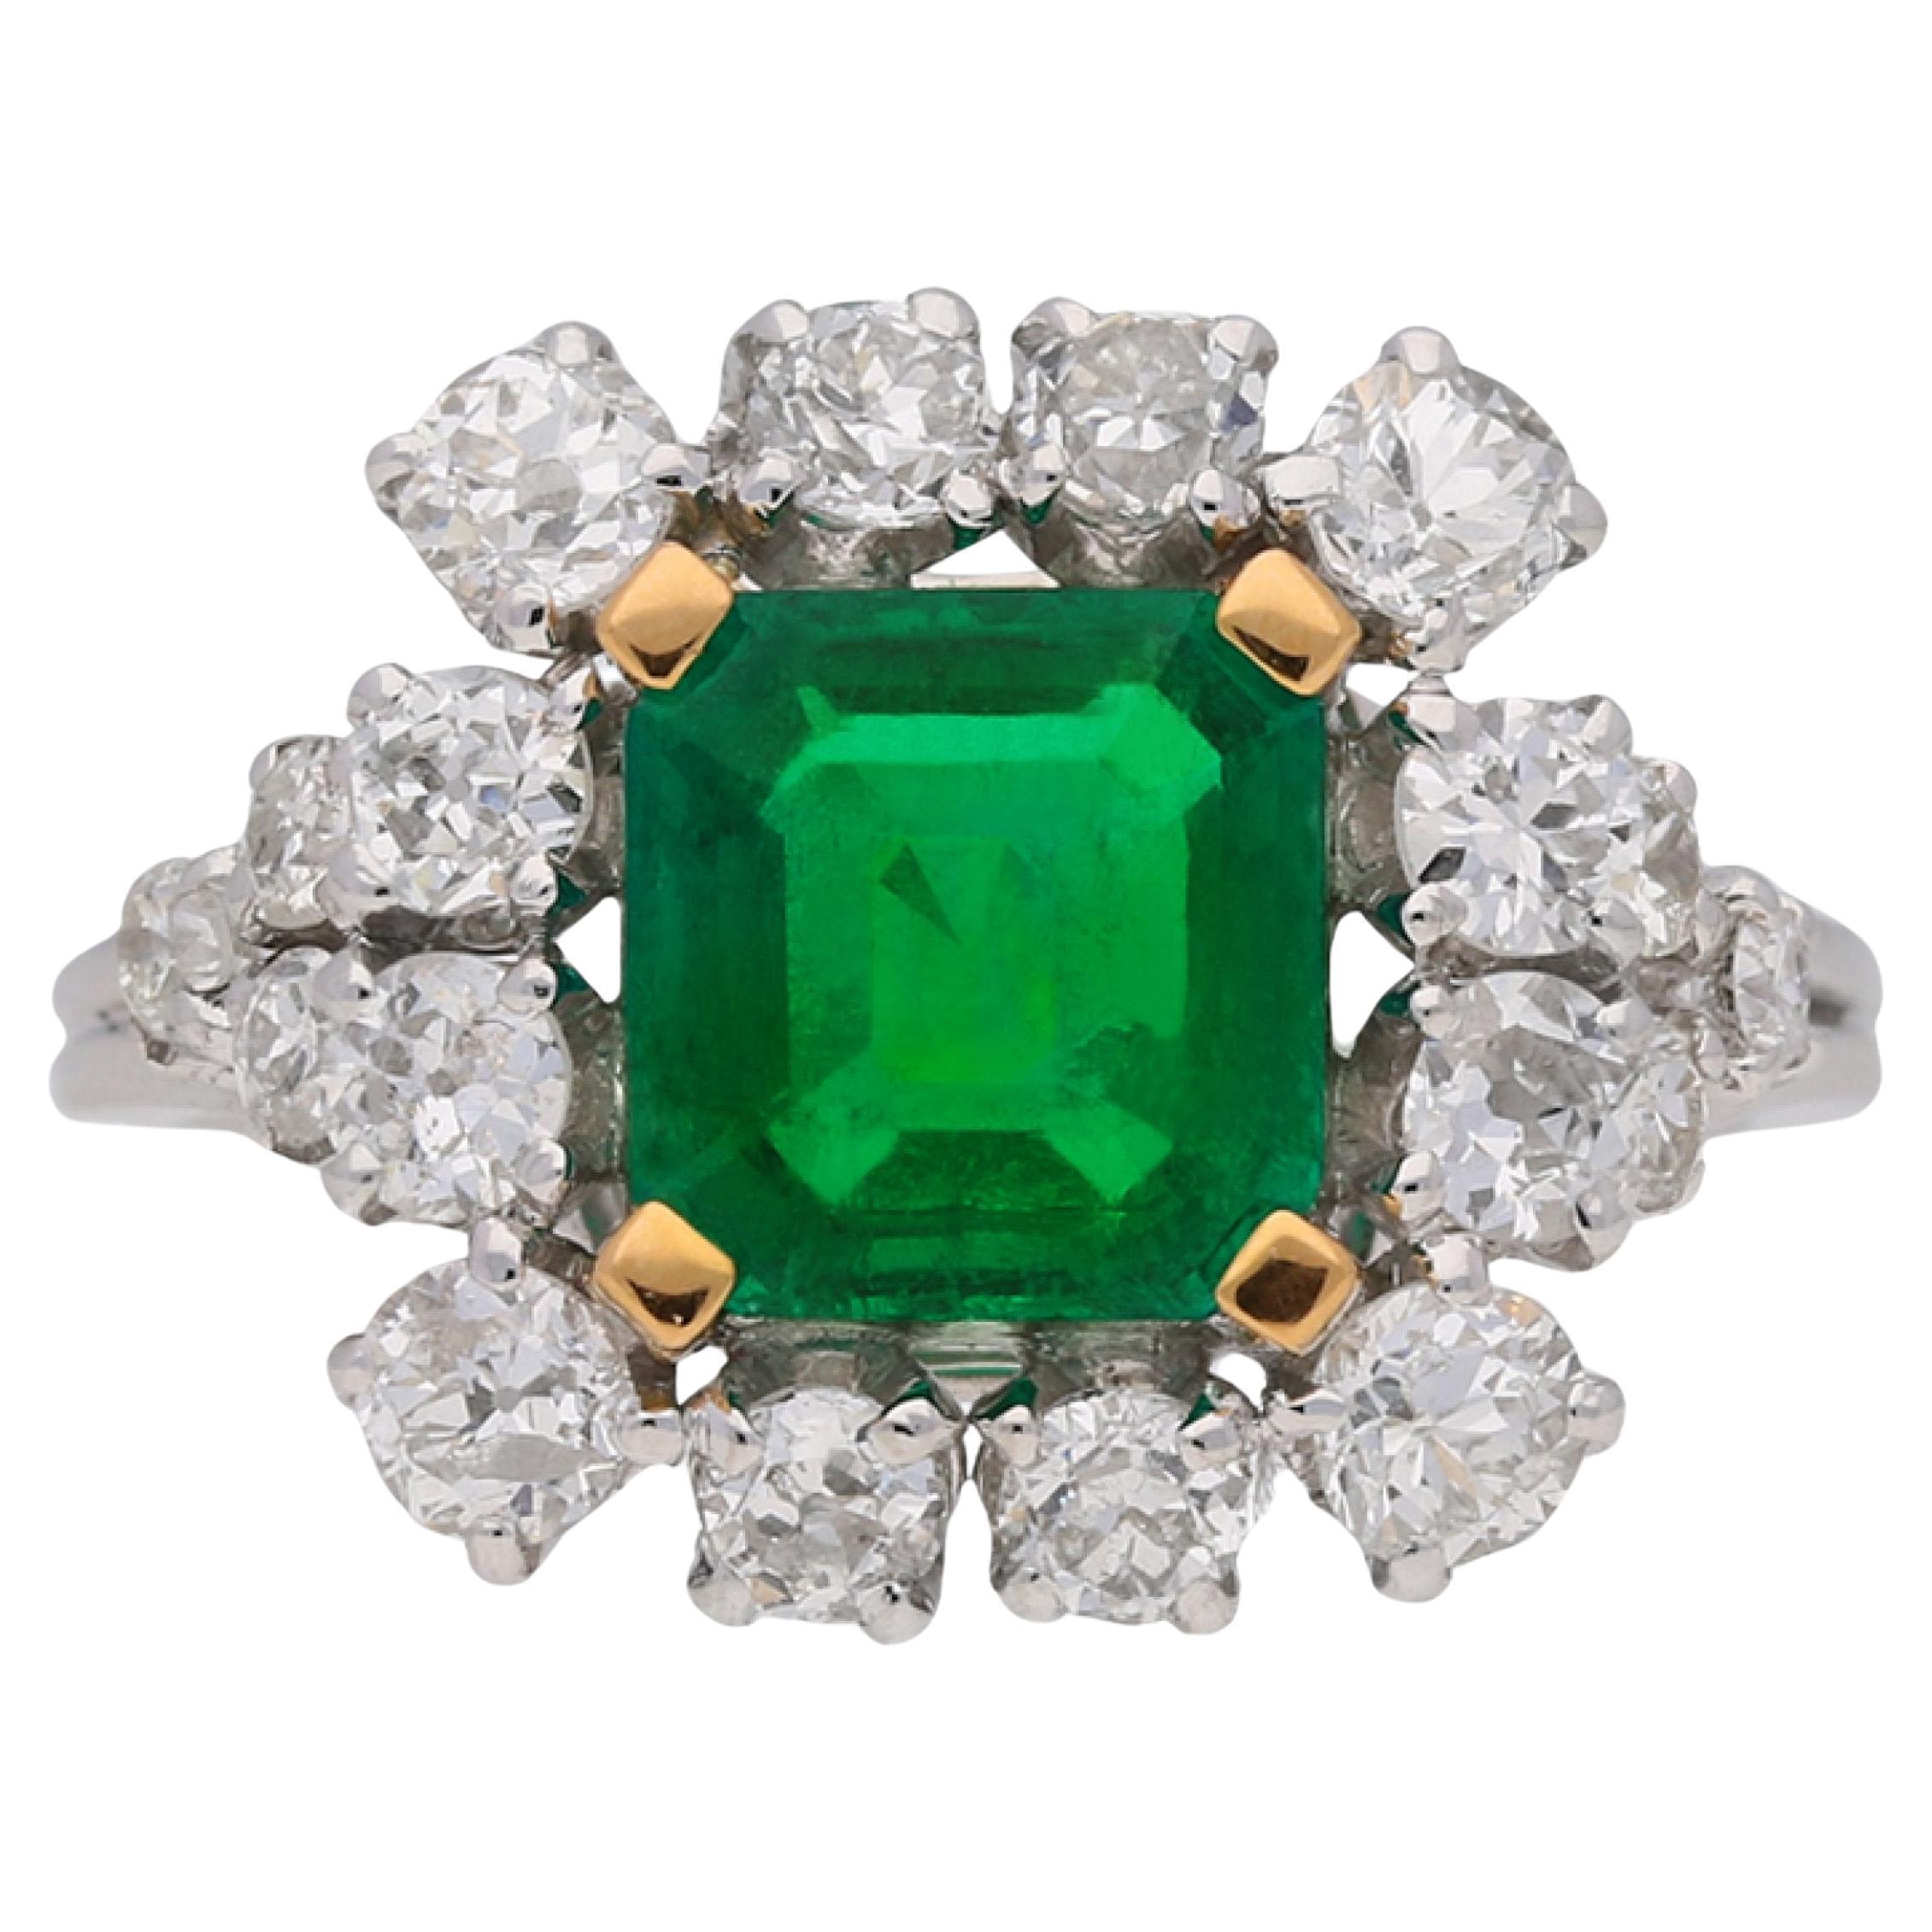 Vintage Colombian emerald and diamond cluster ring, French, circa 1960